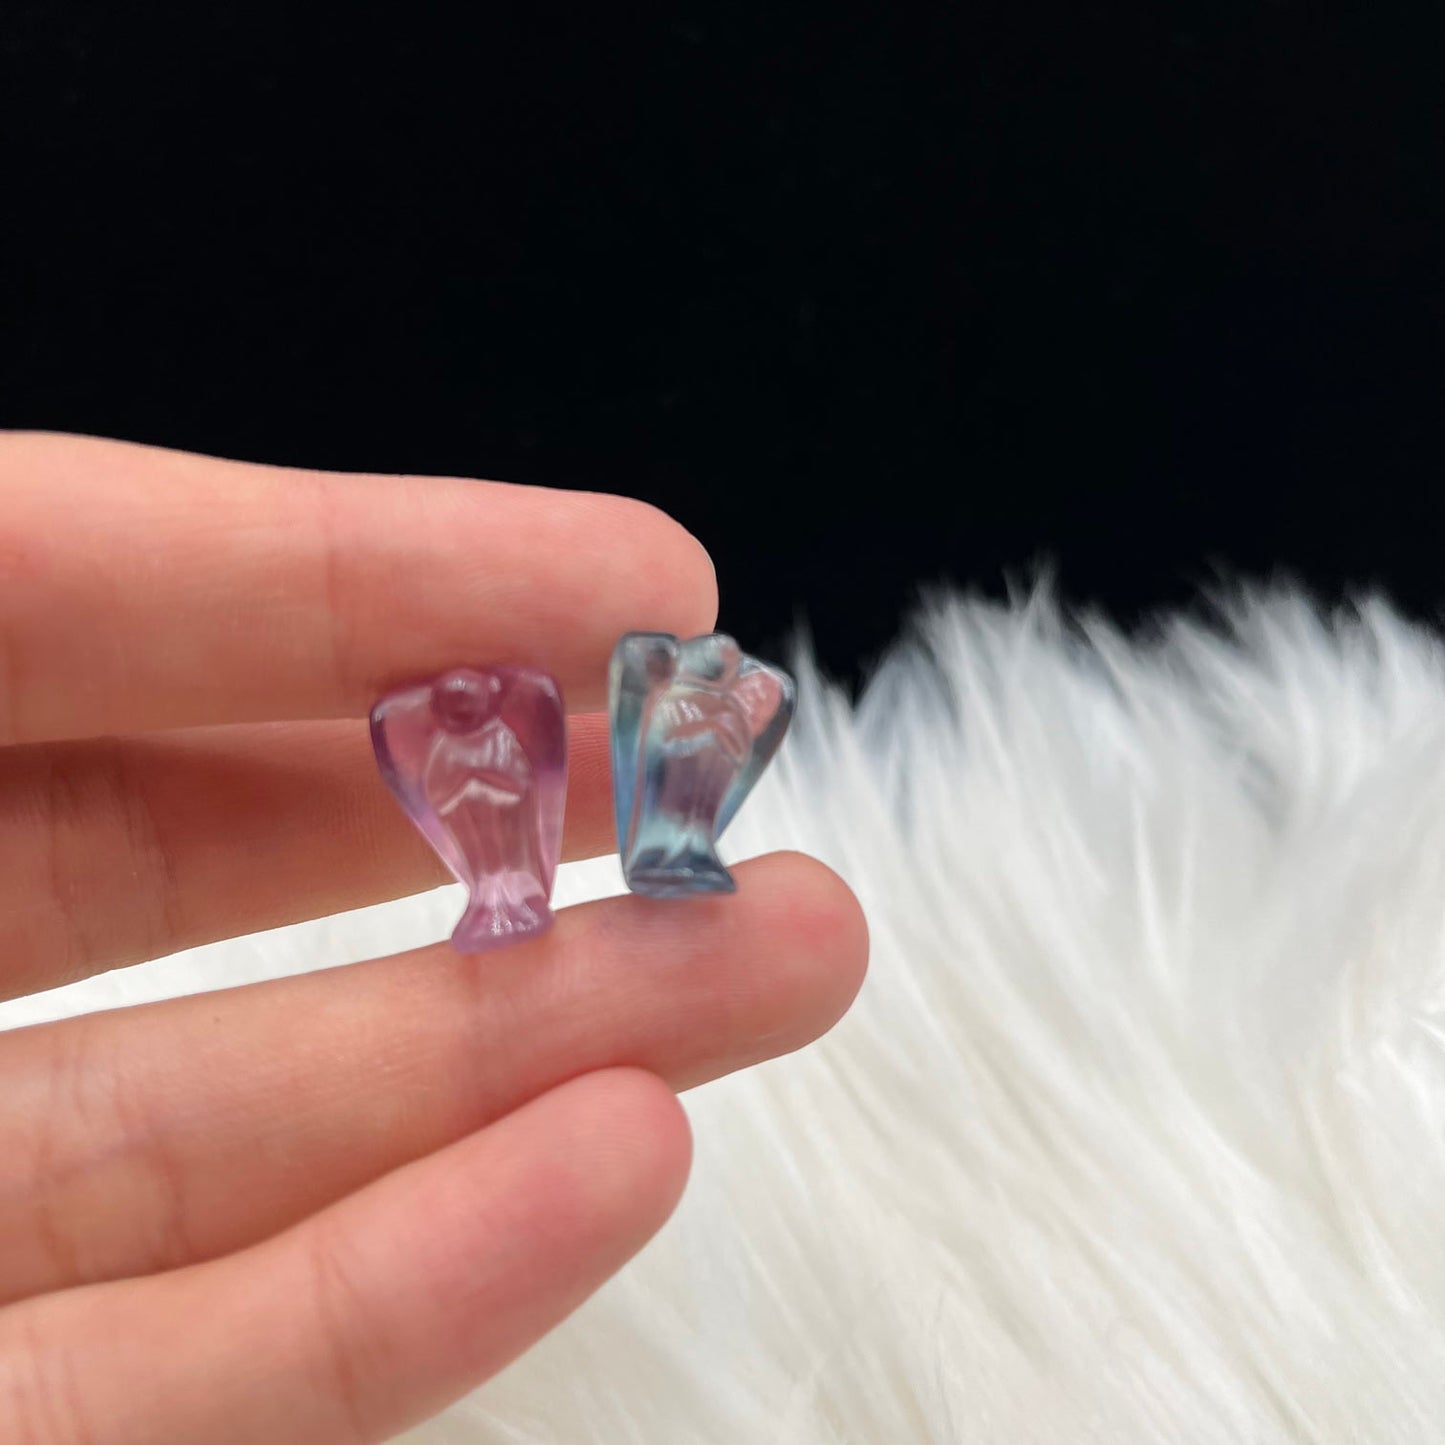 Mini Fluorite Crystal with Body Shark and Squirrel design, size 55